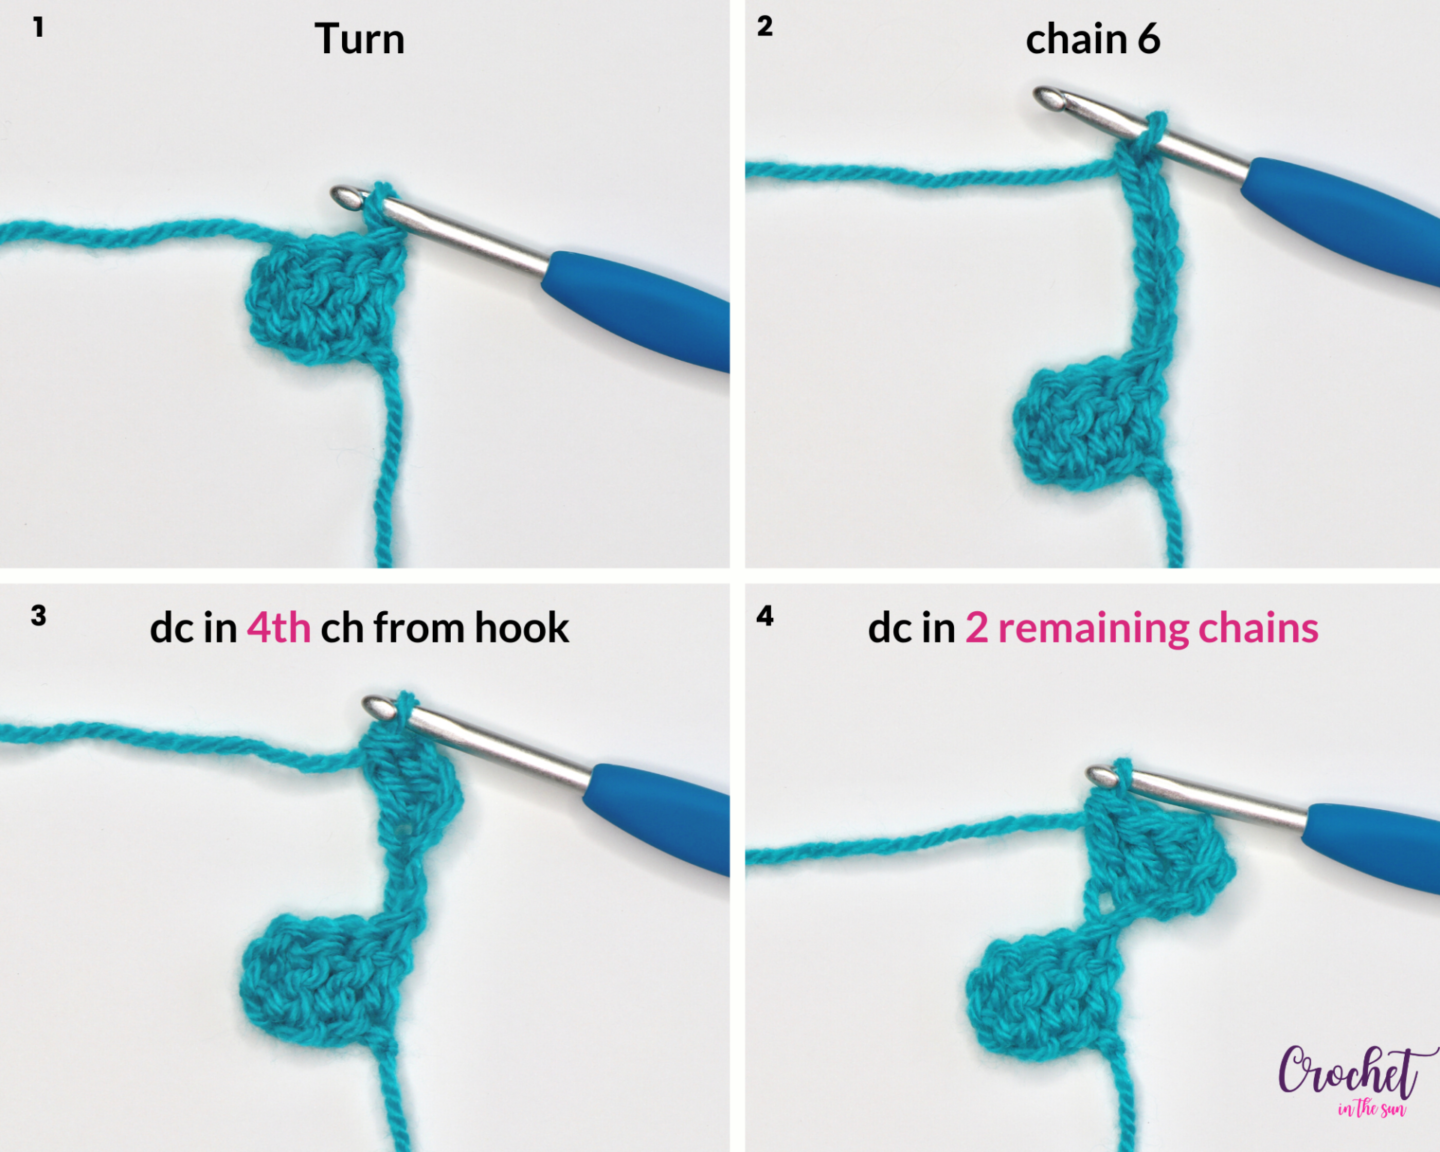 Learn how to corner to corner crochet (photo 2 of 5). This provides a clear, step-by-step photo tutorial for the c2c stitch (corner to corner stitch). This stitch is easy to learn and is beginner friendly. Learn how to crochet! There are so many c2c project ideas you will be able to complete!